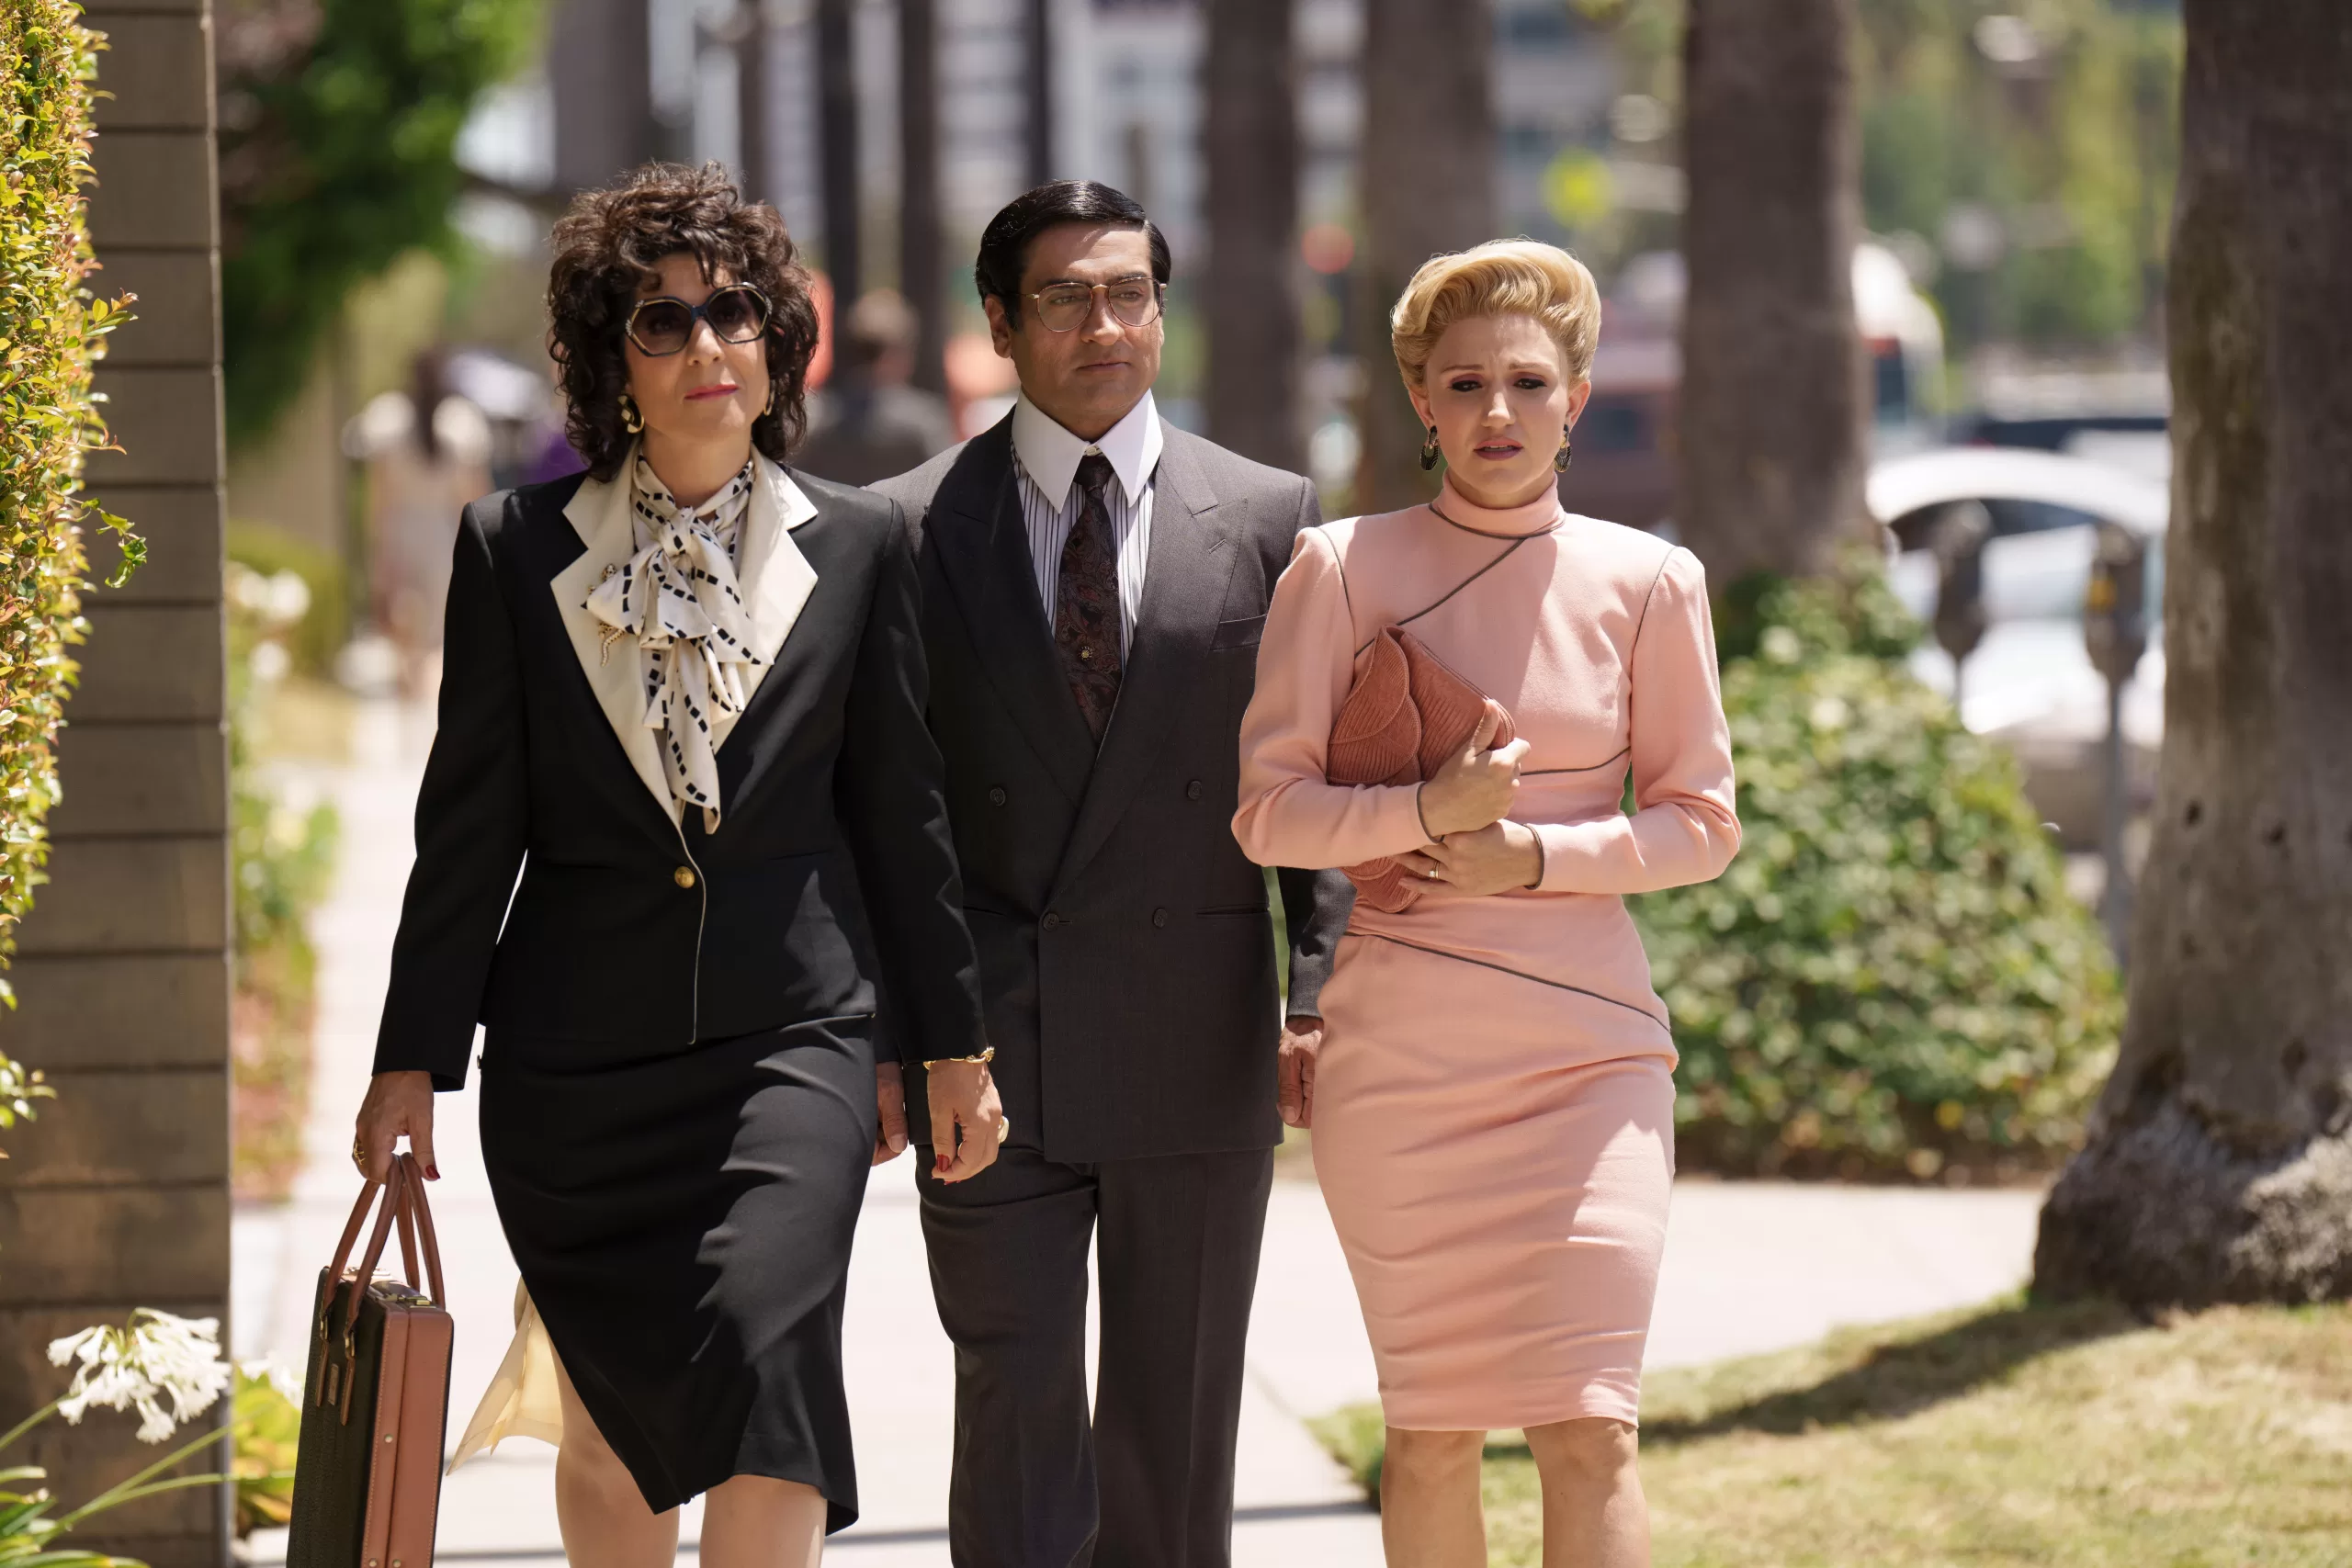 Kumail in a suit as Steve walks towards the camera, with Cheryl to his left in a black suit, and Irene to his right in a pink suit. All of them are dressed in 80s attire.